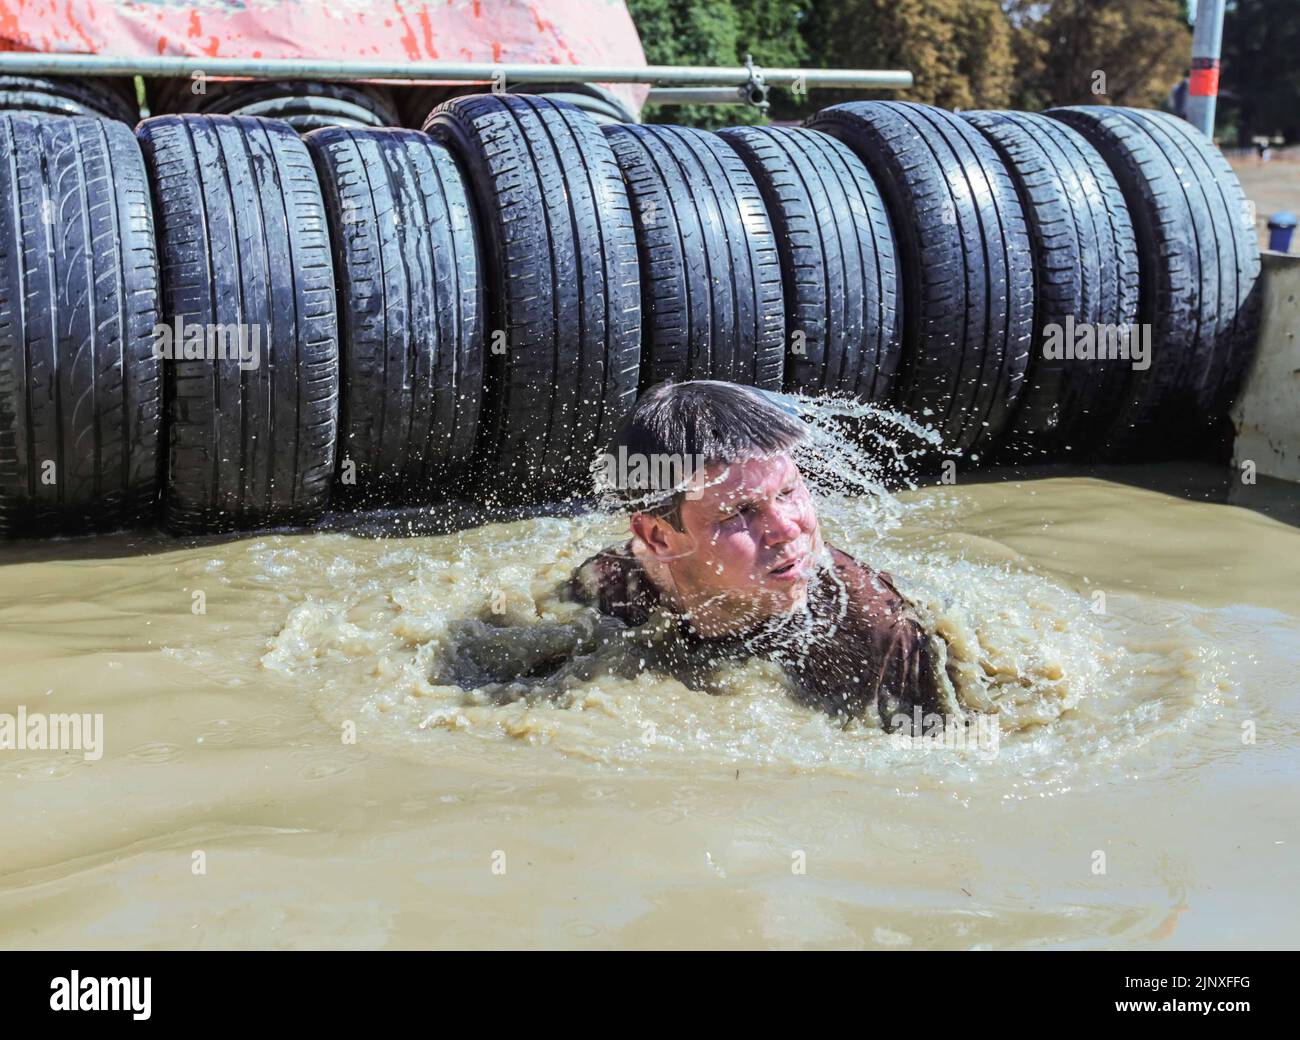 London UK 14 August 2022 Competitors of the Tough Mudder event in Morden Park London cherishing the challenge of conquering the different obstacles put between them and victory, Paul Quezada-Neiman/Alamy Live News Stock Photo